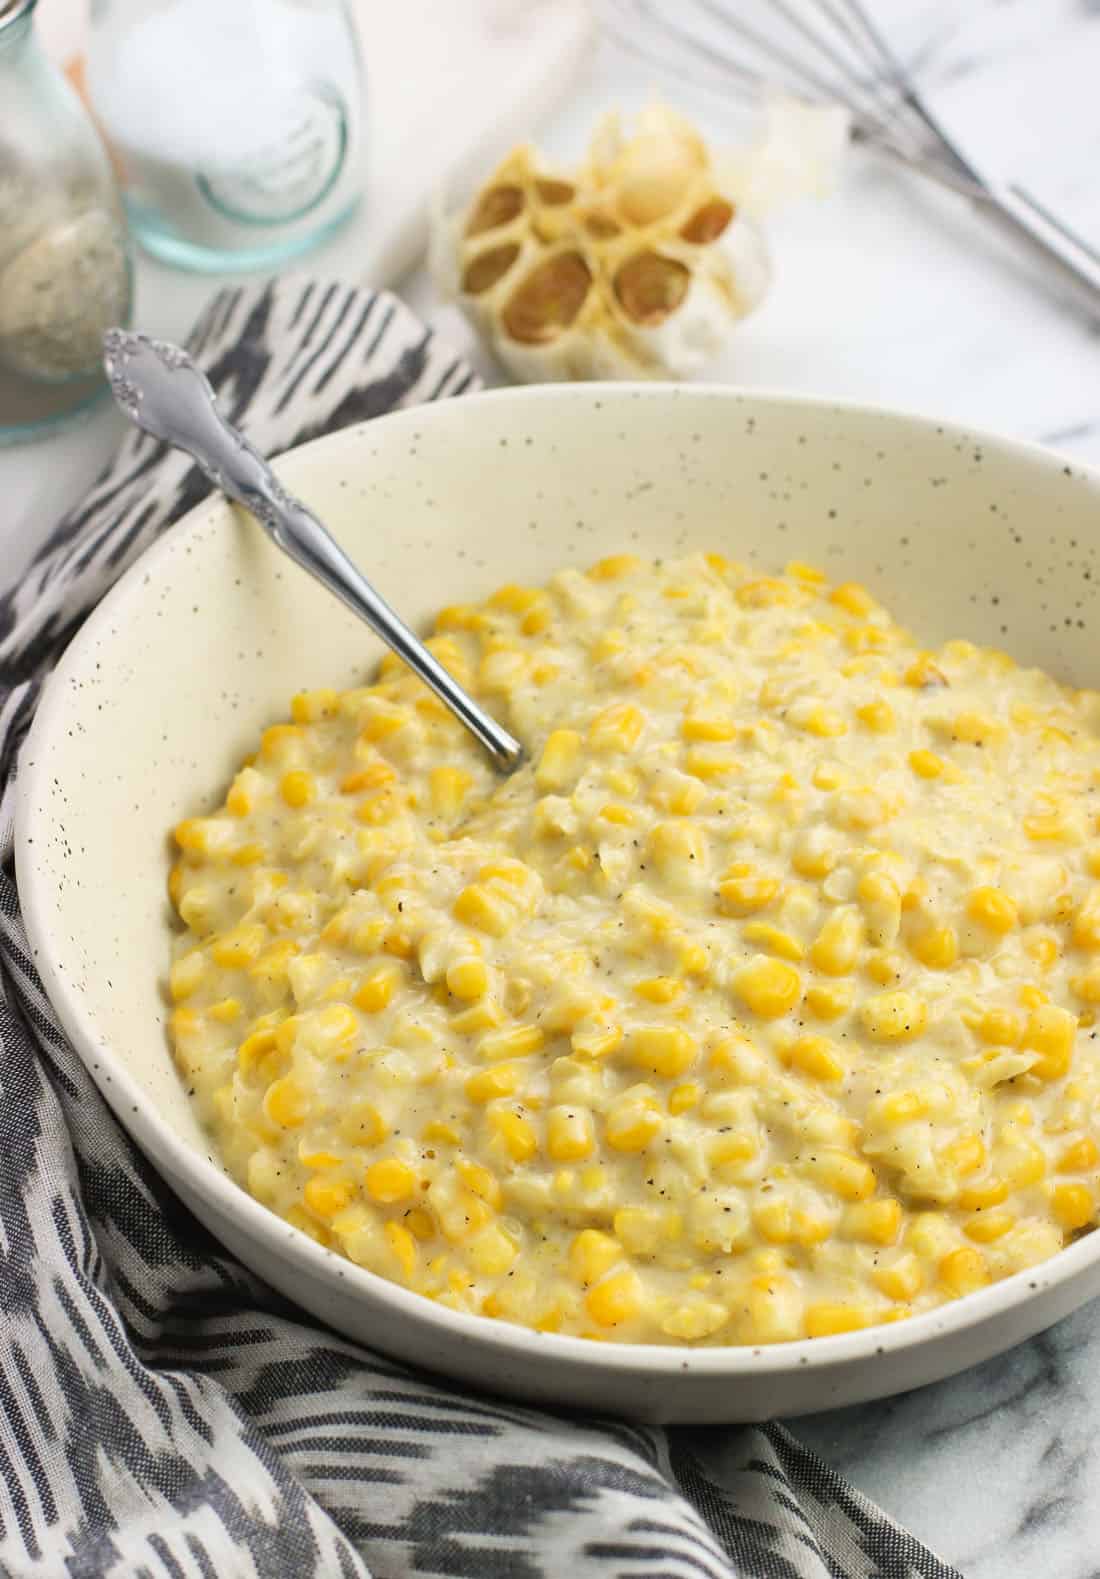 A ceramic serving bowl of creamed corn with a spoon in it next to a dish towel, salt and pepper shakers, and a roasted garlic head